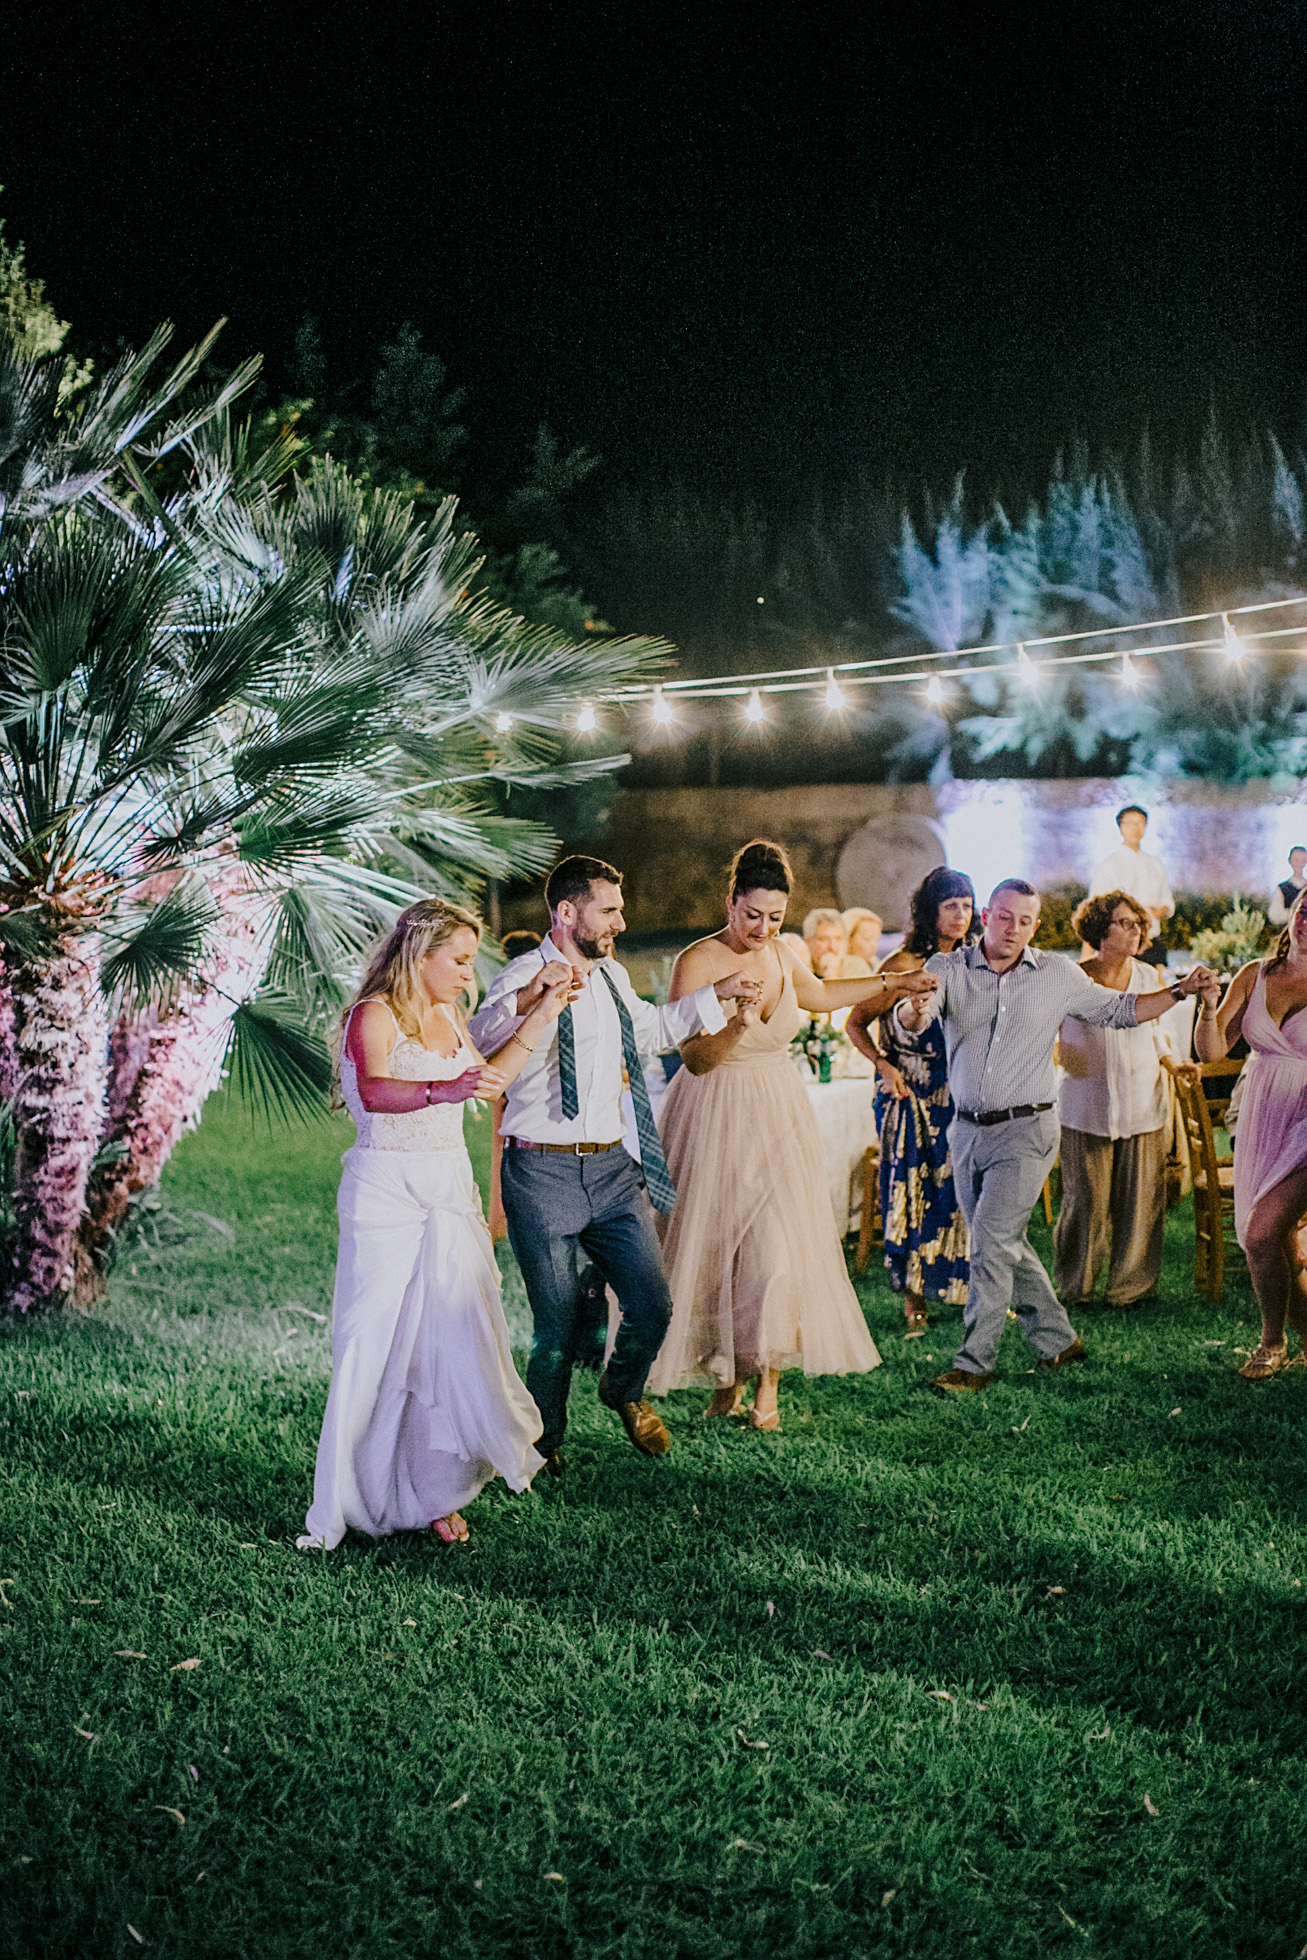 Bride and groom dancing traditional Greek dances on an exclusive wedding night in Metohi Kindelis, Chania, Crete photographed by professional photographer team.